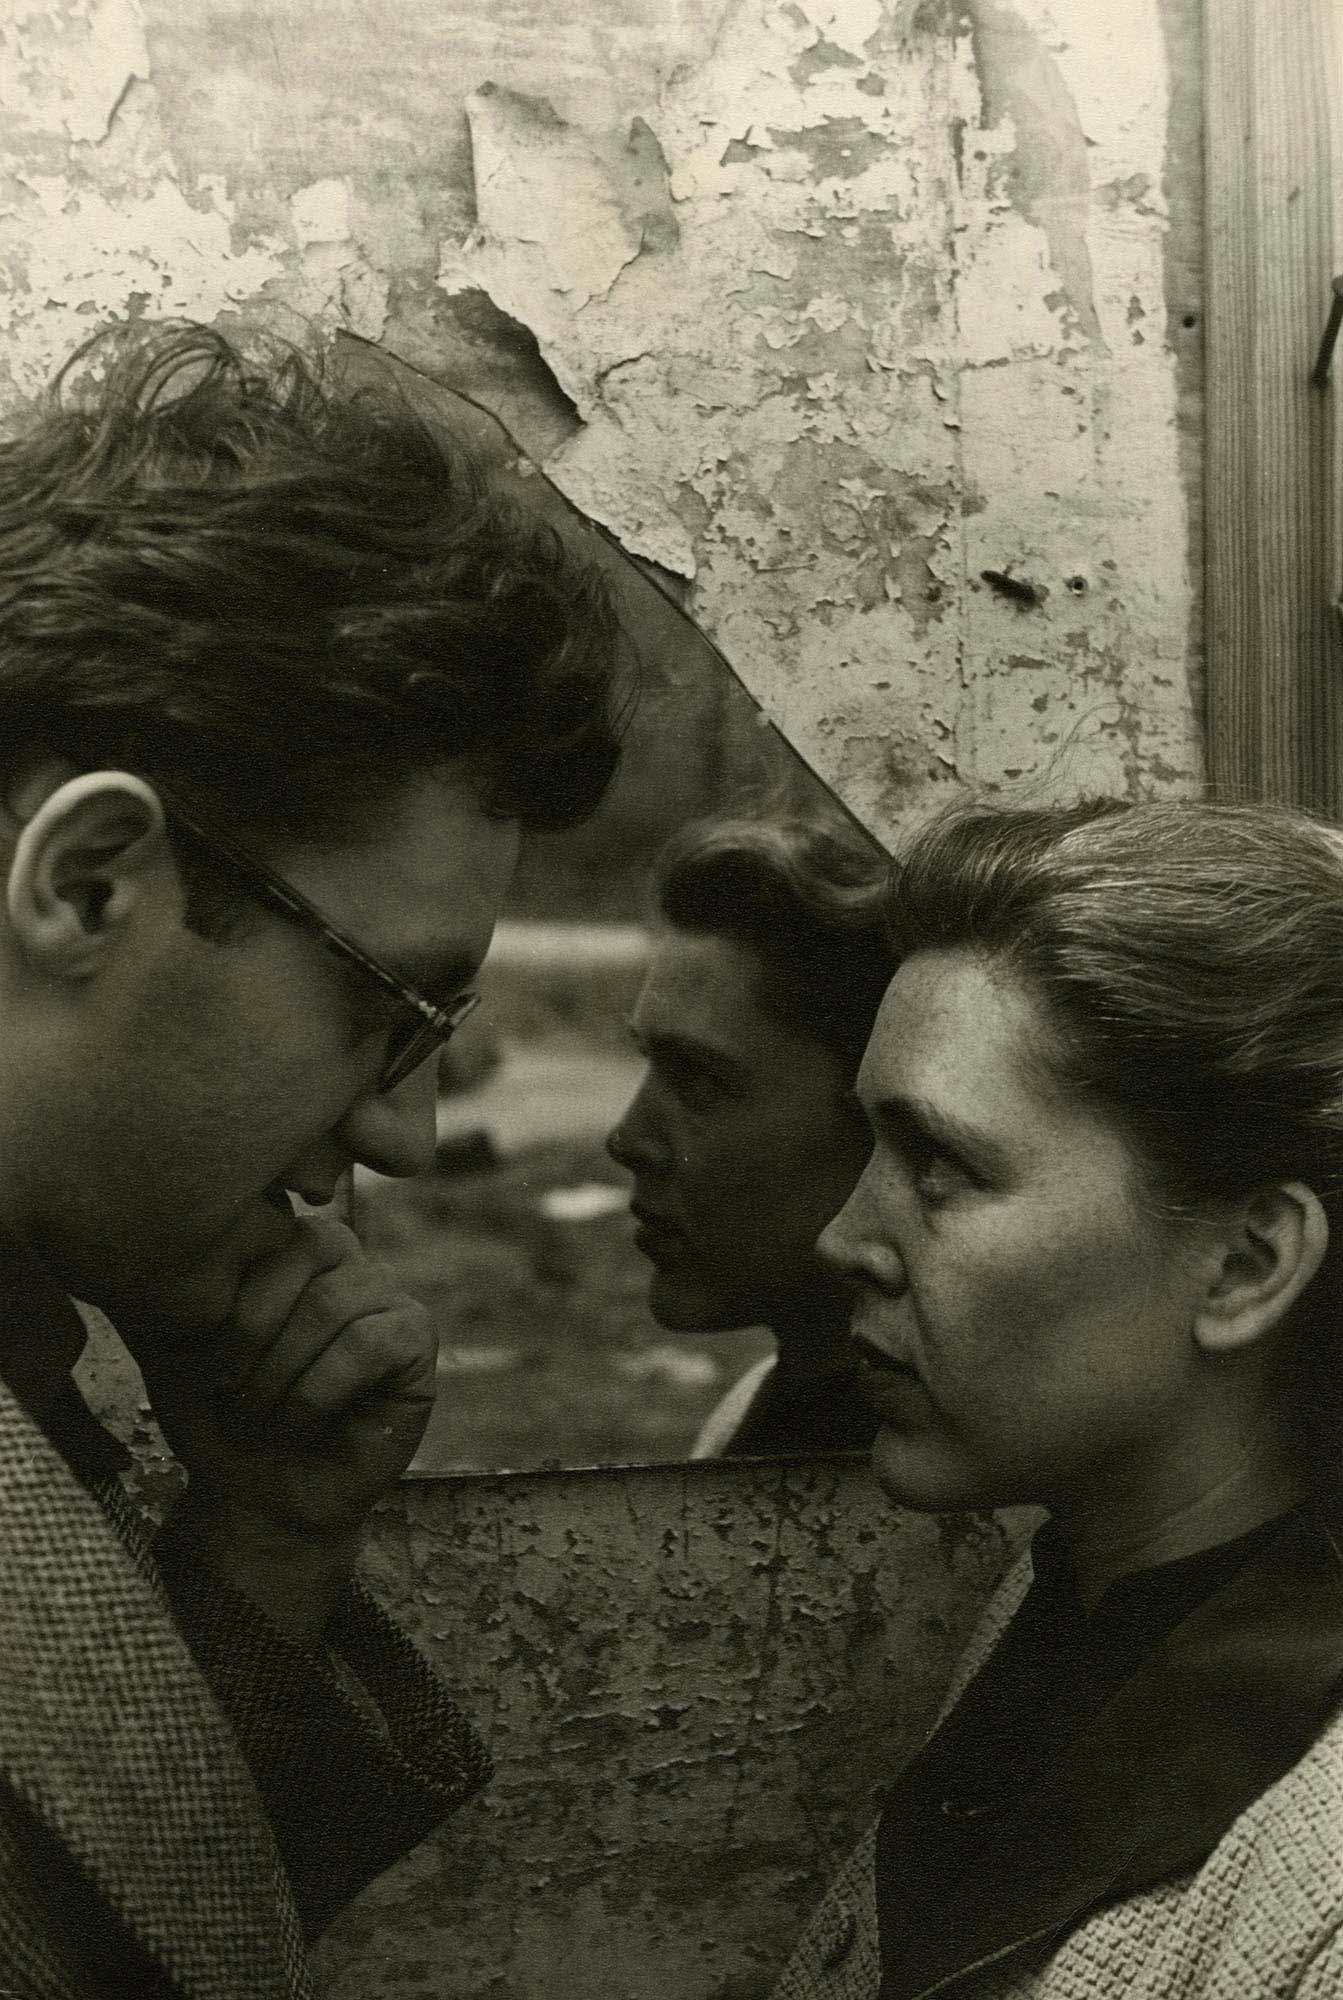 Saul and Barbara Leiter	
c. 1951-54
Gelatin silver print
13 x 8 3/4 in. (33 x 22.2 cm)
 – The Richard Pousette-Dart Foundation